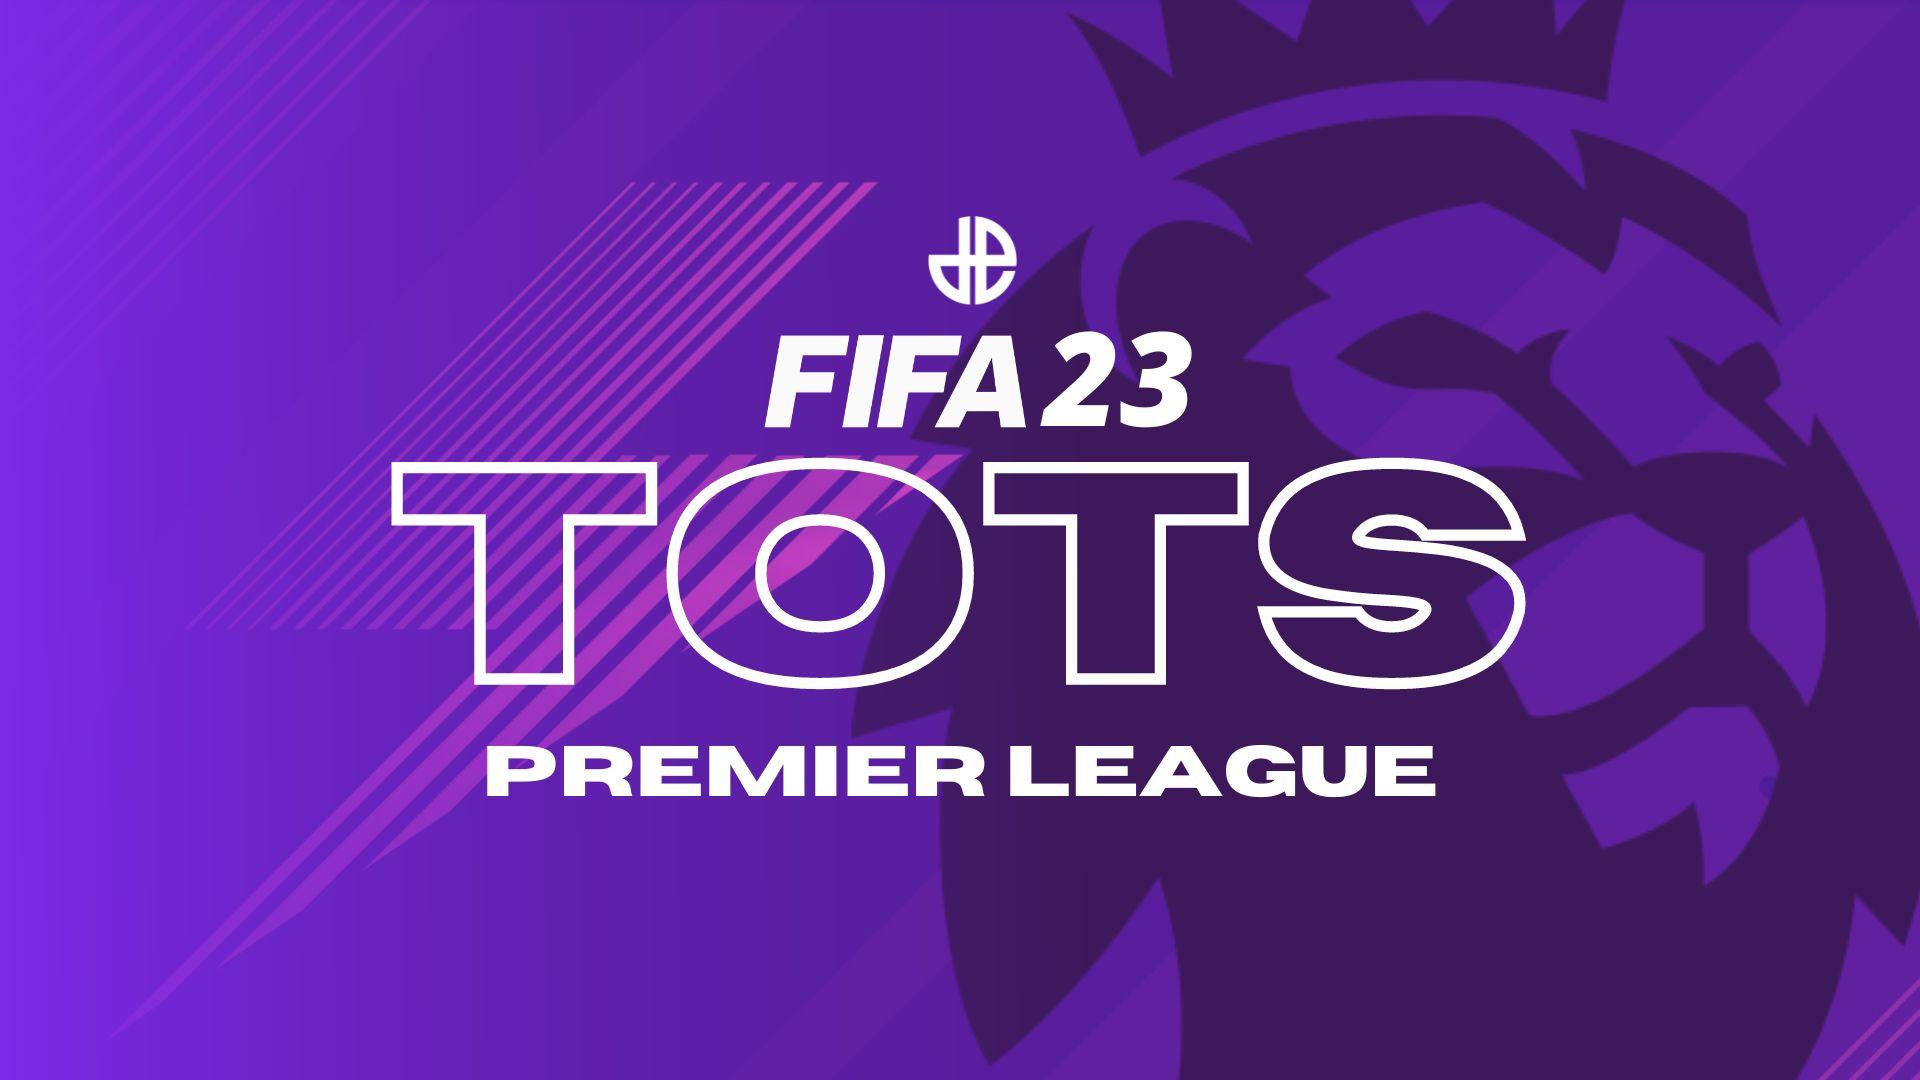 FIFA 23 logo with Premier League logo and text